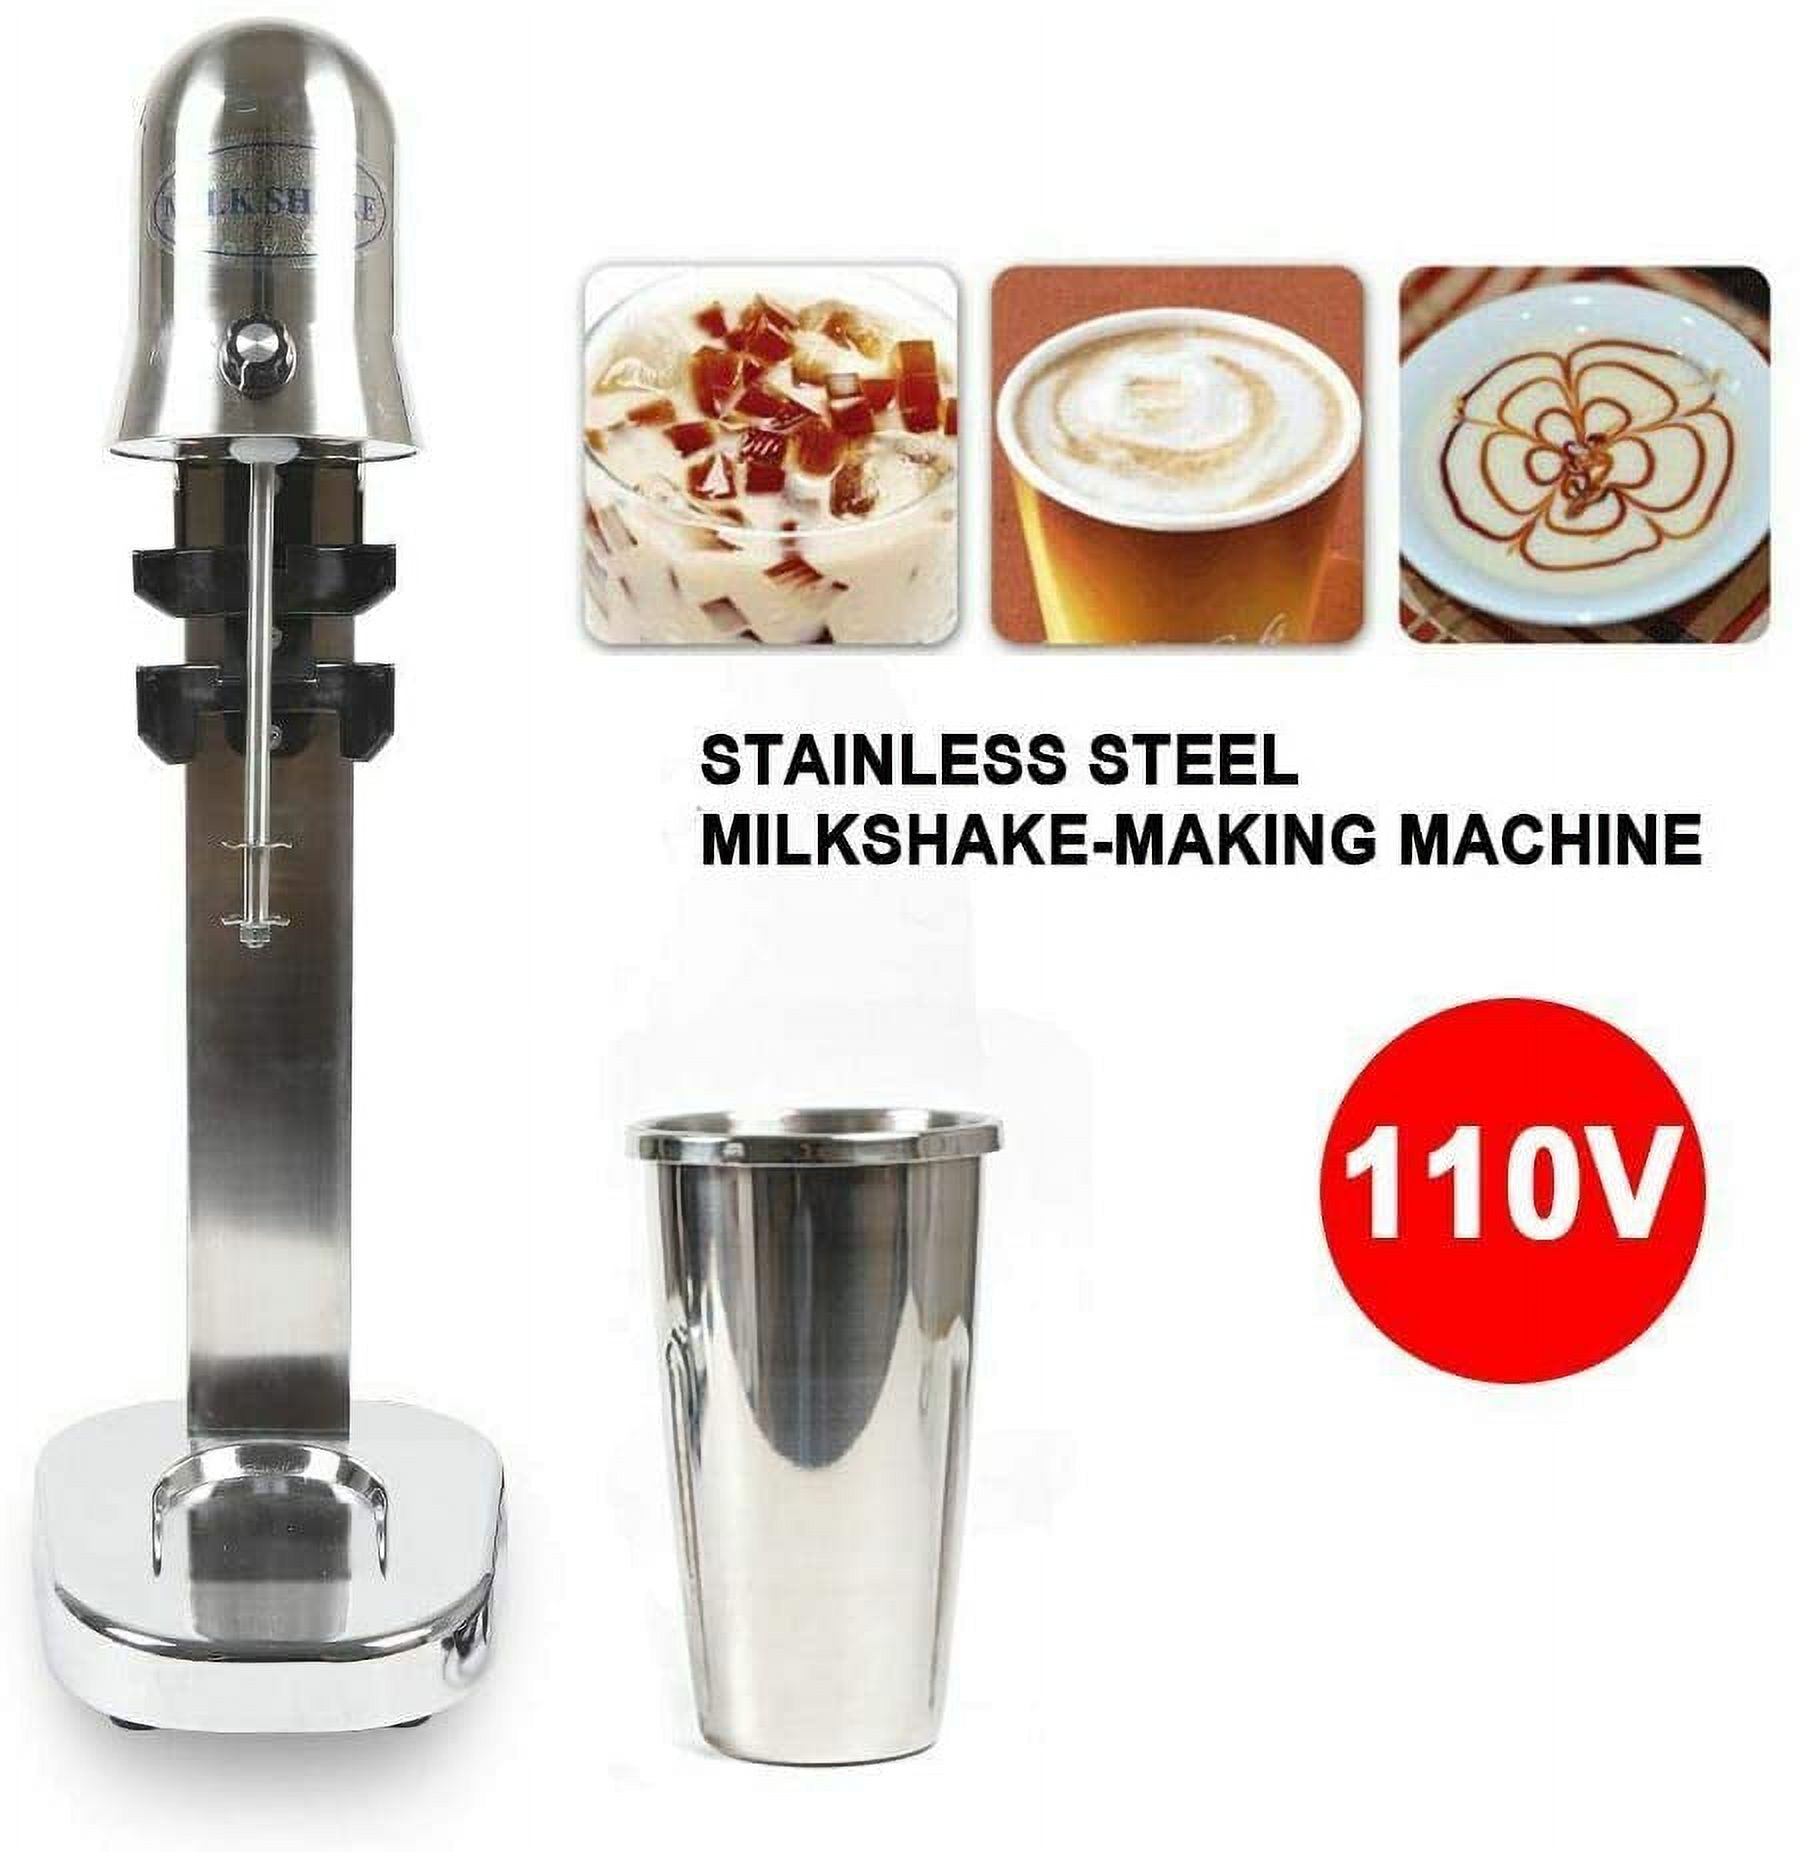 Electric Milk Shaker 110V 60HZ 280W 18000RMP Commercial Stainless Steel Drink Mixer Machine Smoothie Malt Blender 4.5KG with 2 Speed Adjustable for Home Shop (Round Head) - image 1 of 8